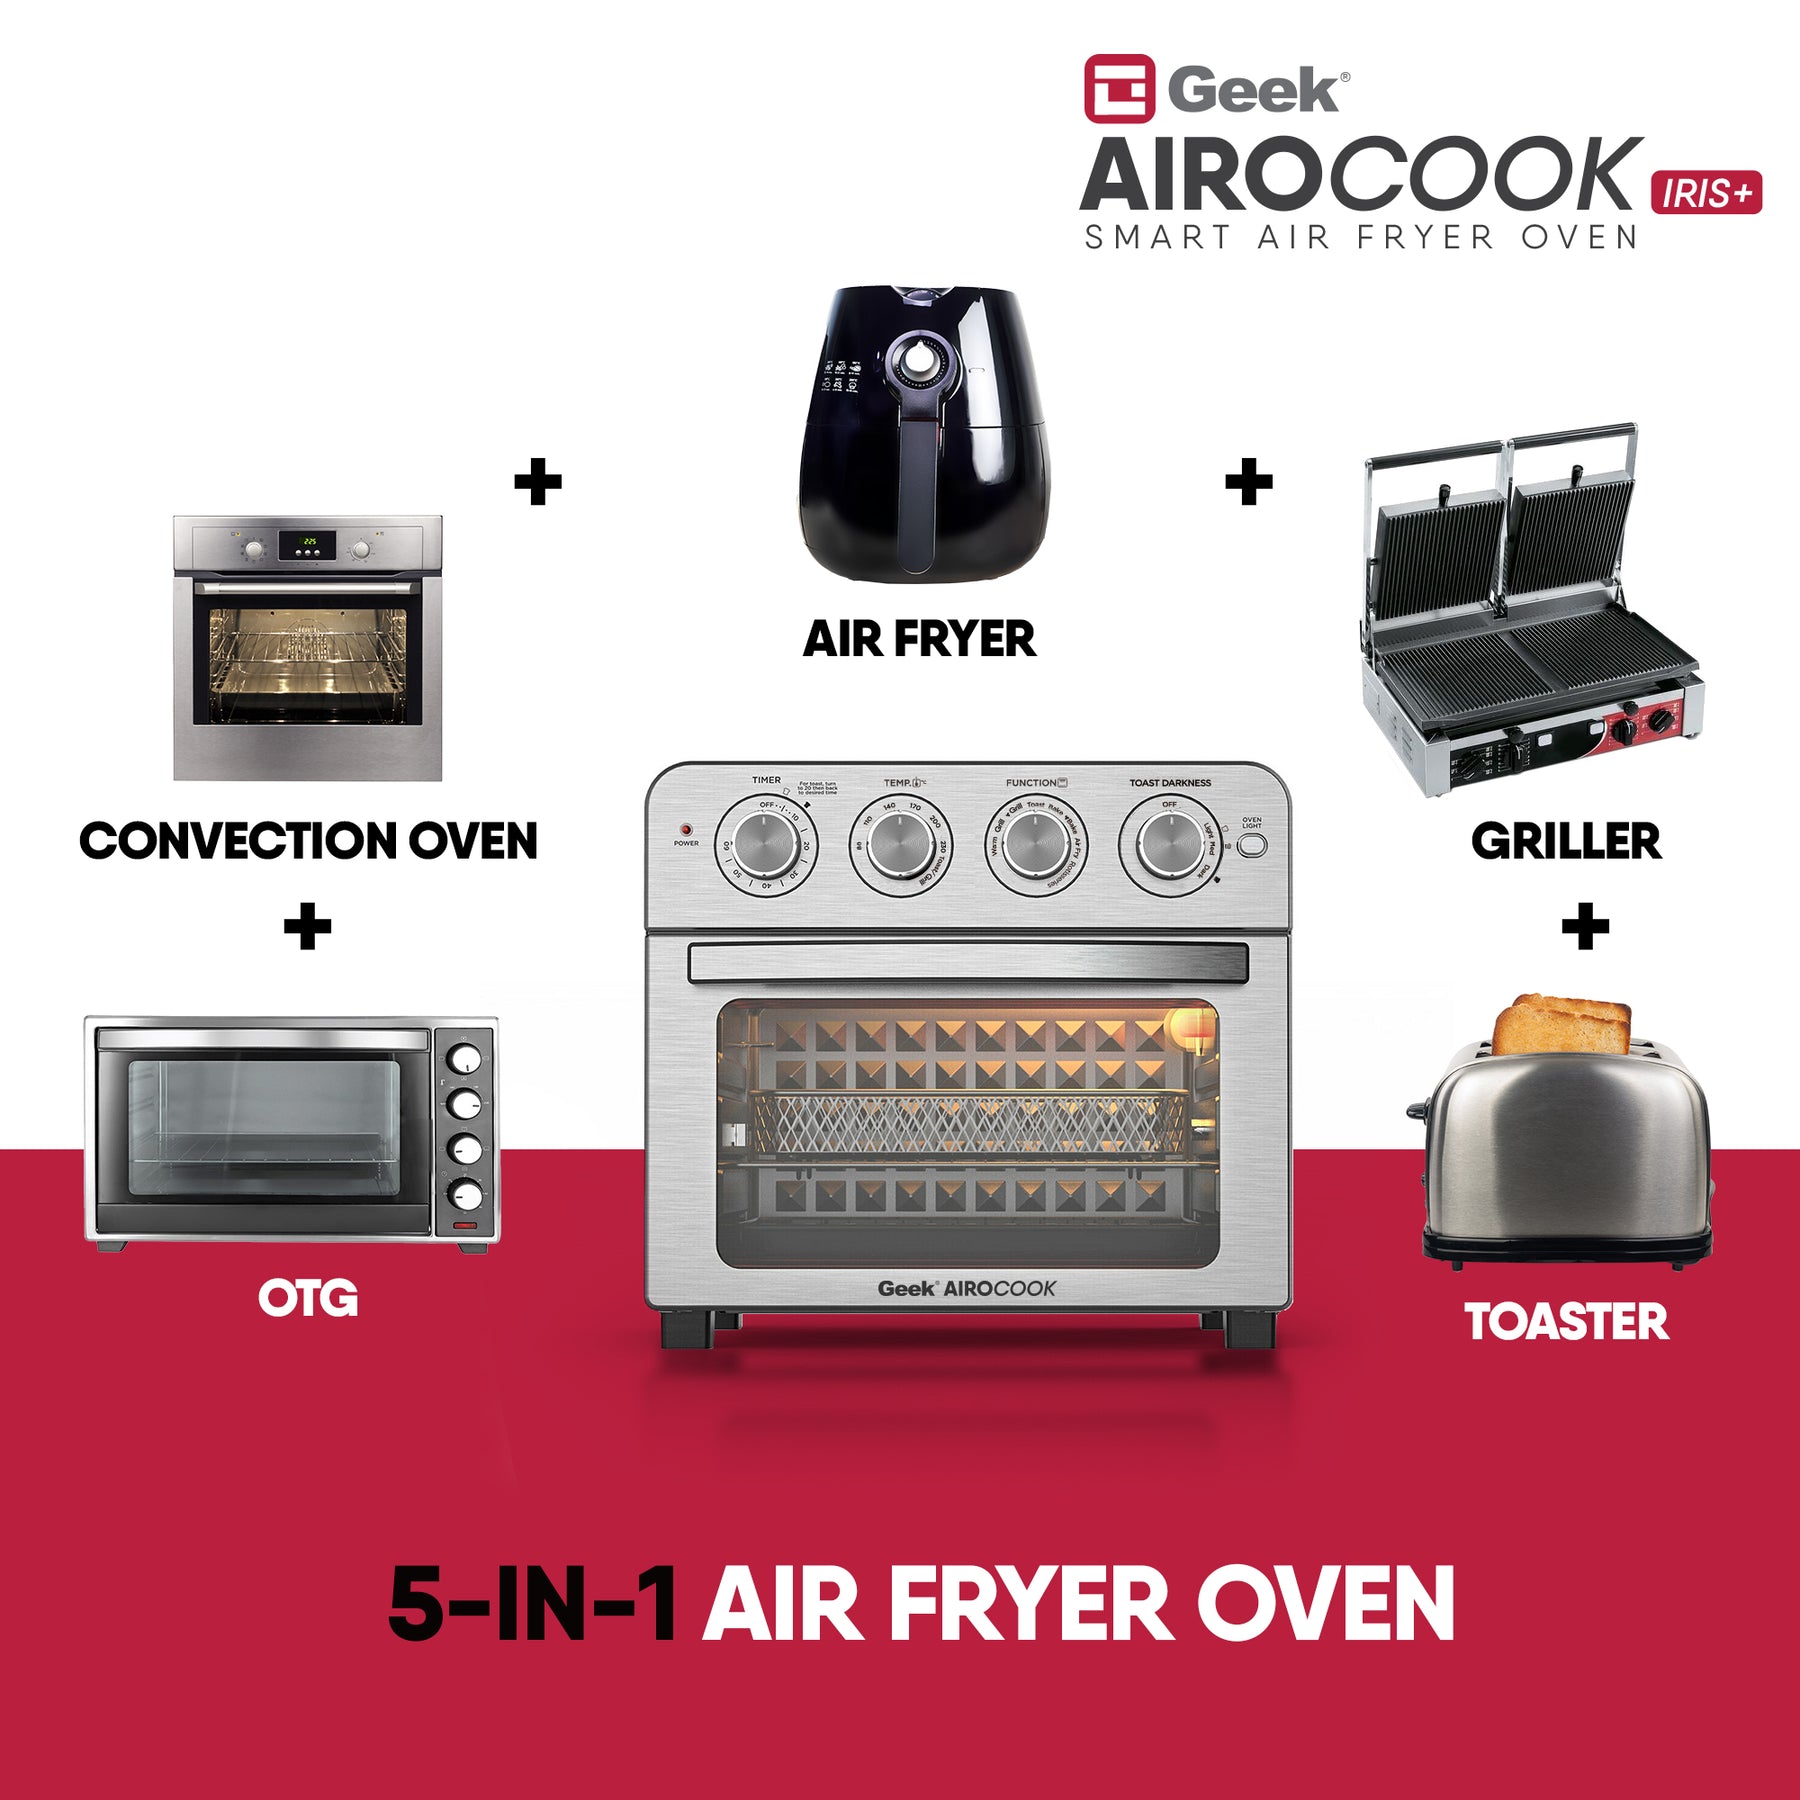 Kitchen - Small Appliances - Fryers - DASH 23L Air Fryer Oven with  Accessories - Online Shopping for Canadians